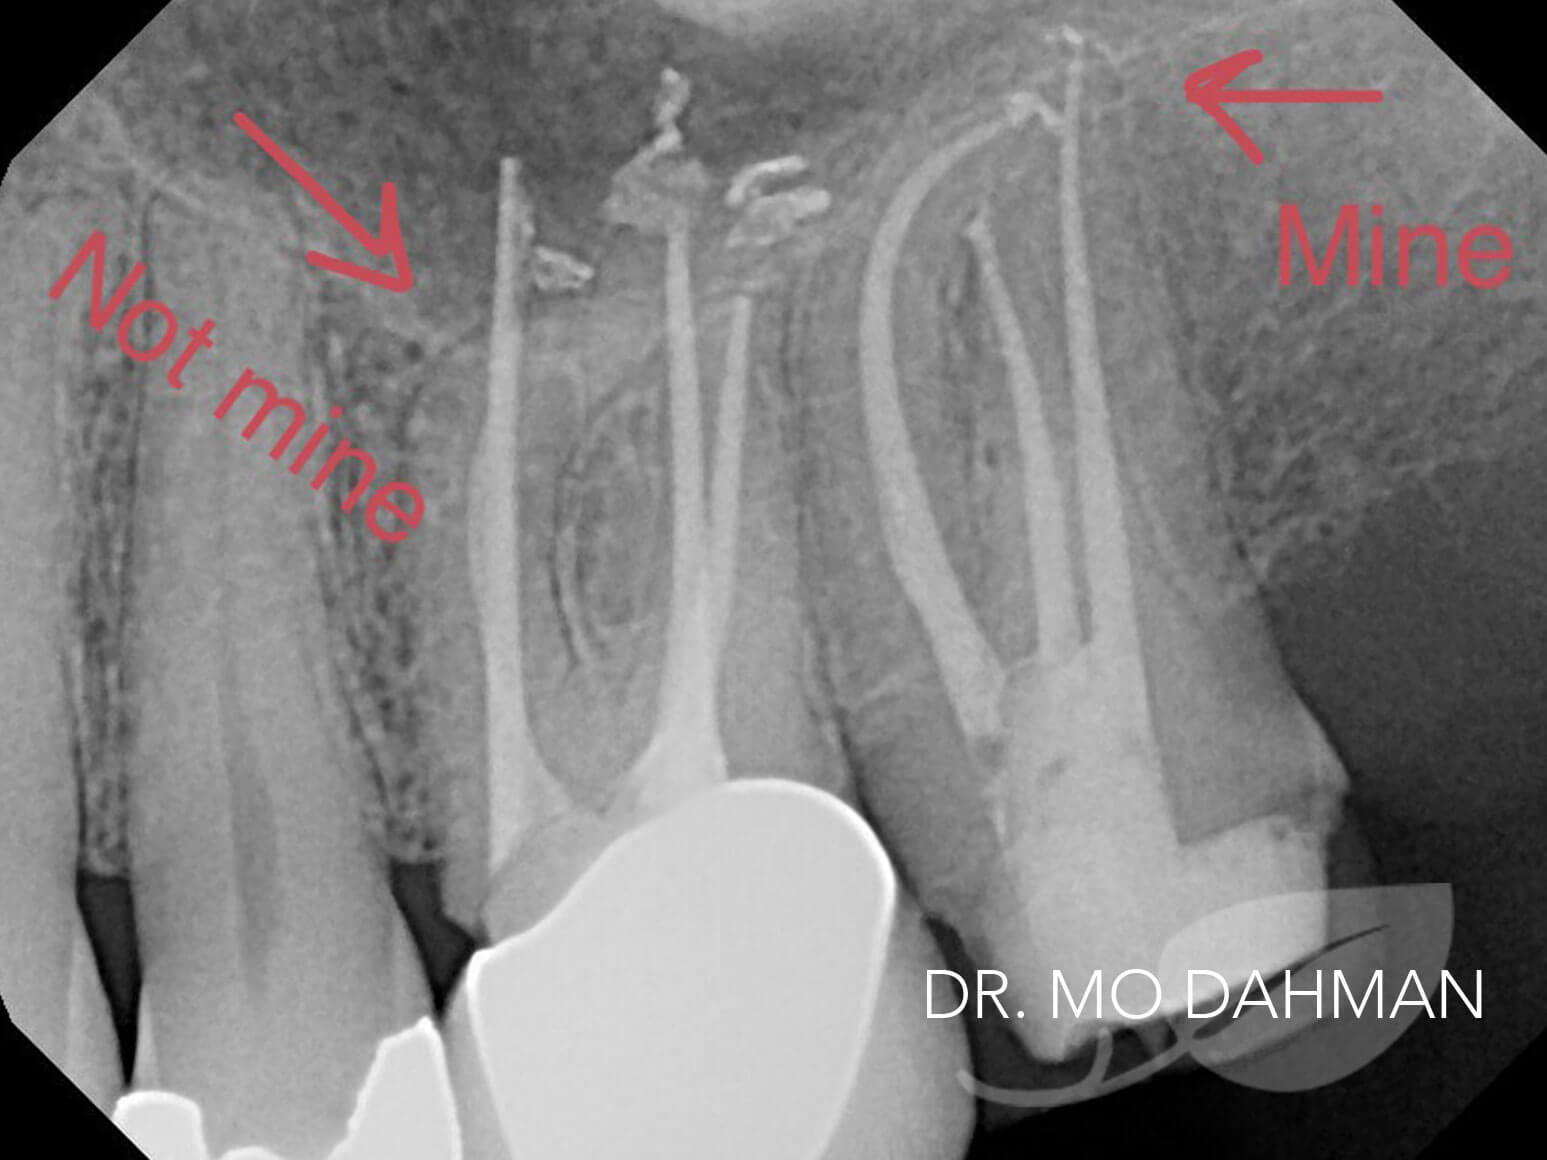 Case 17 xray after